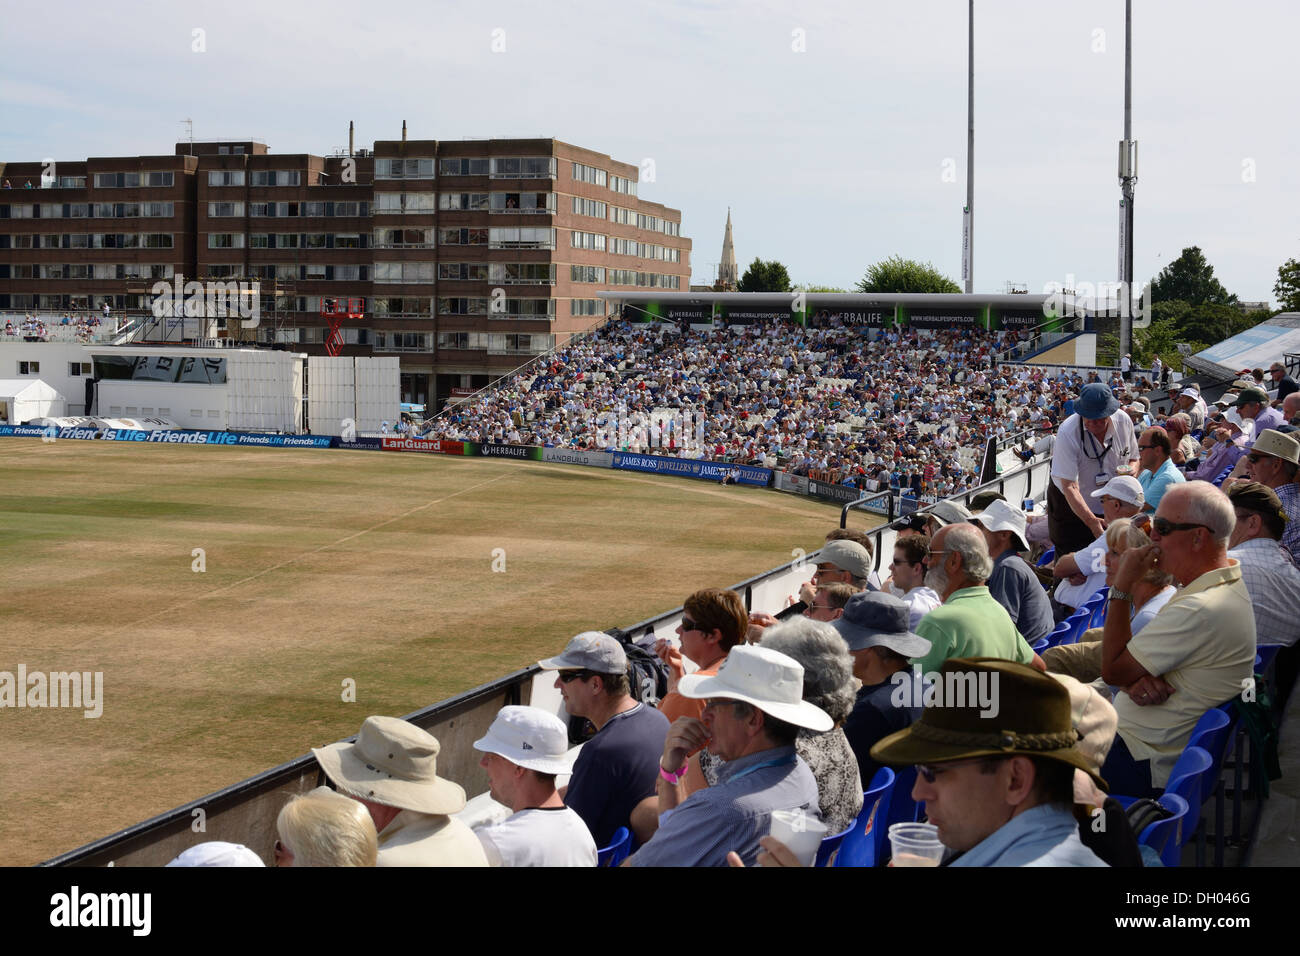 Sussex cricket ground at Brighton and Hove. England versus Australia match. Crowds of spectators. Stock Photo